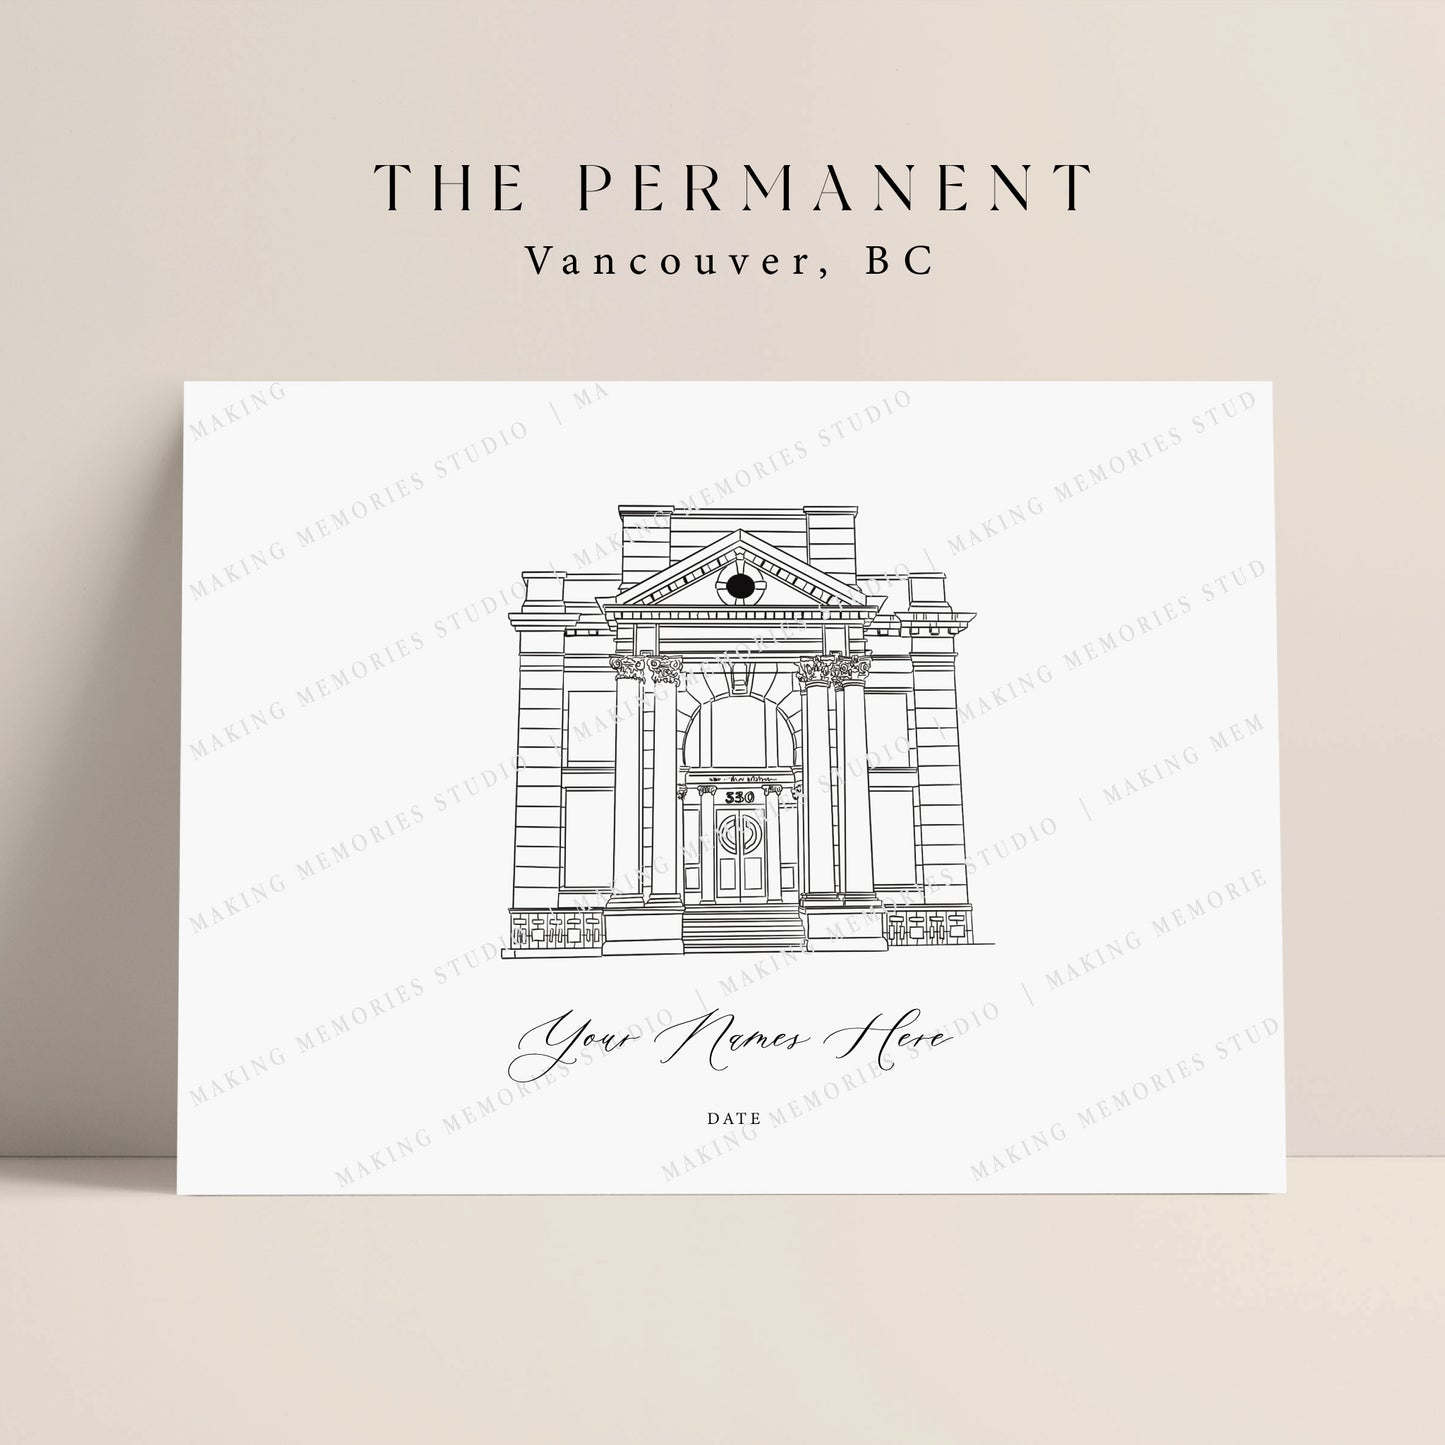 The Permanent